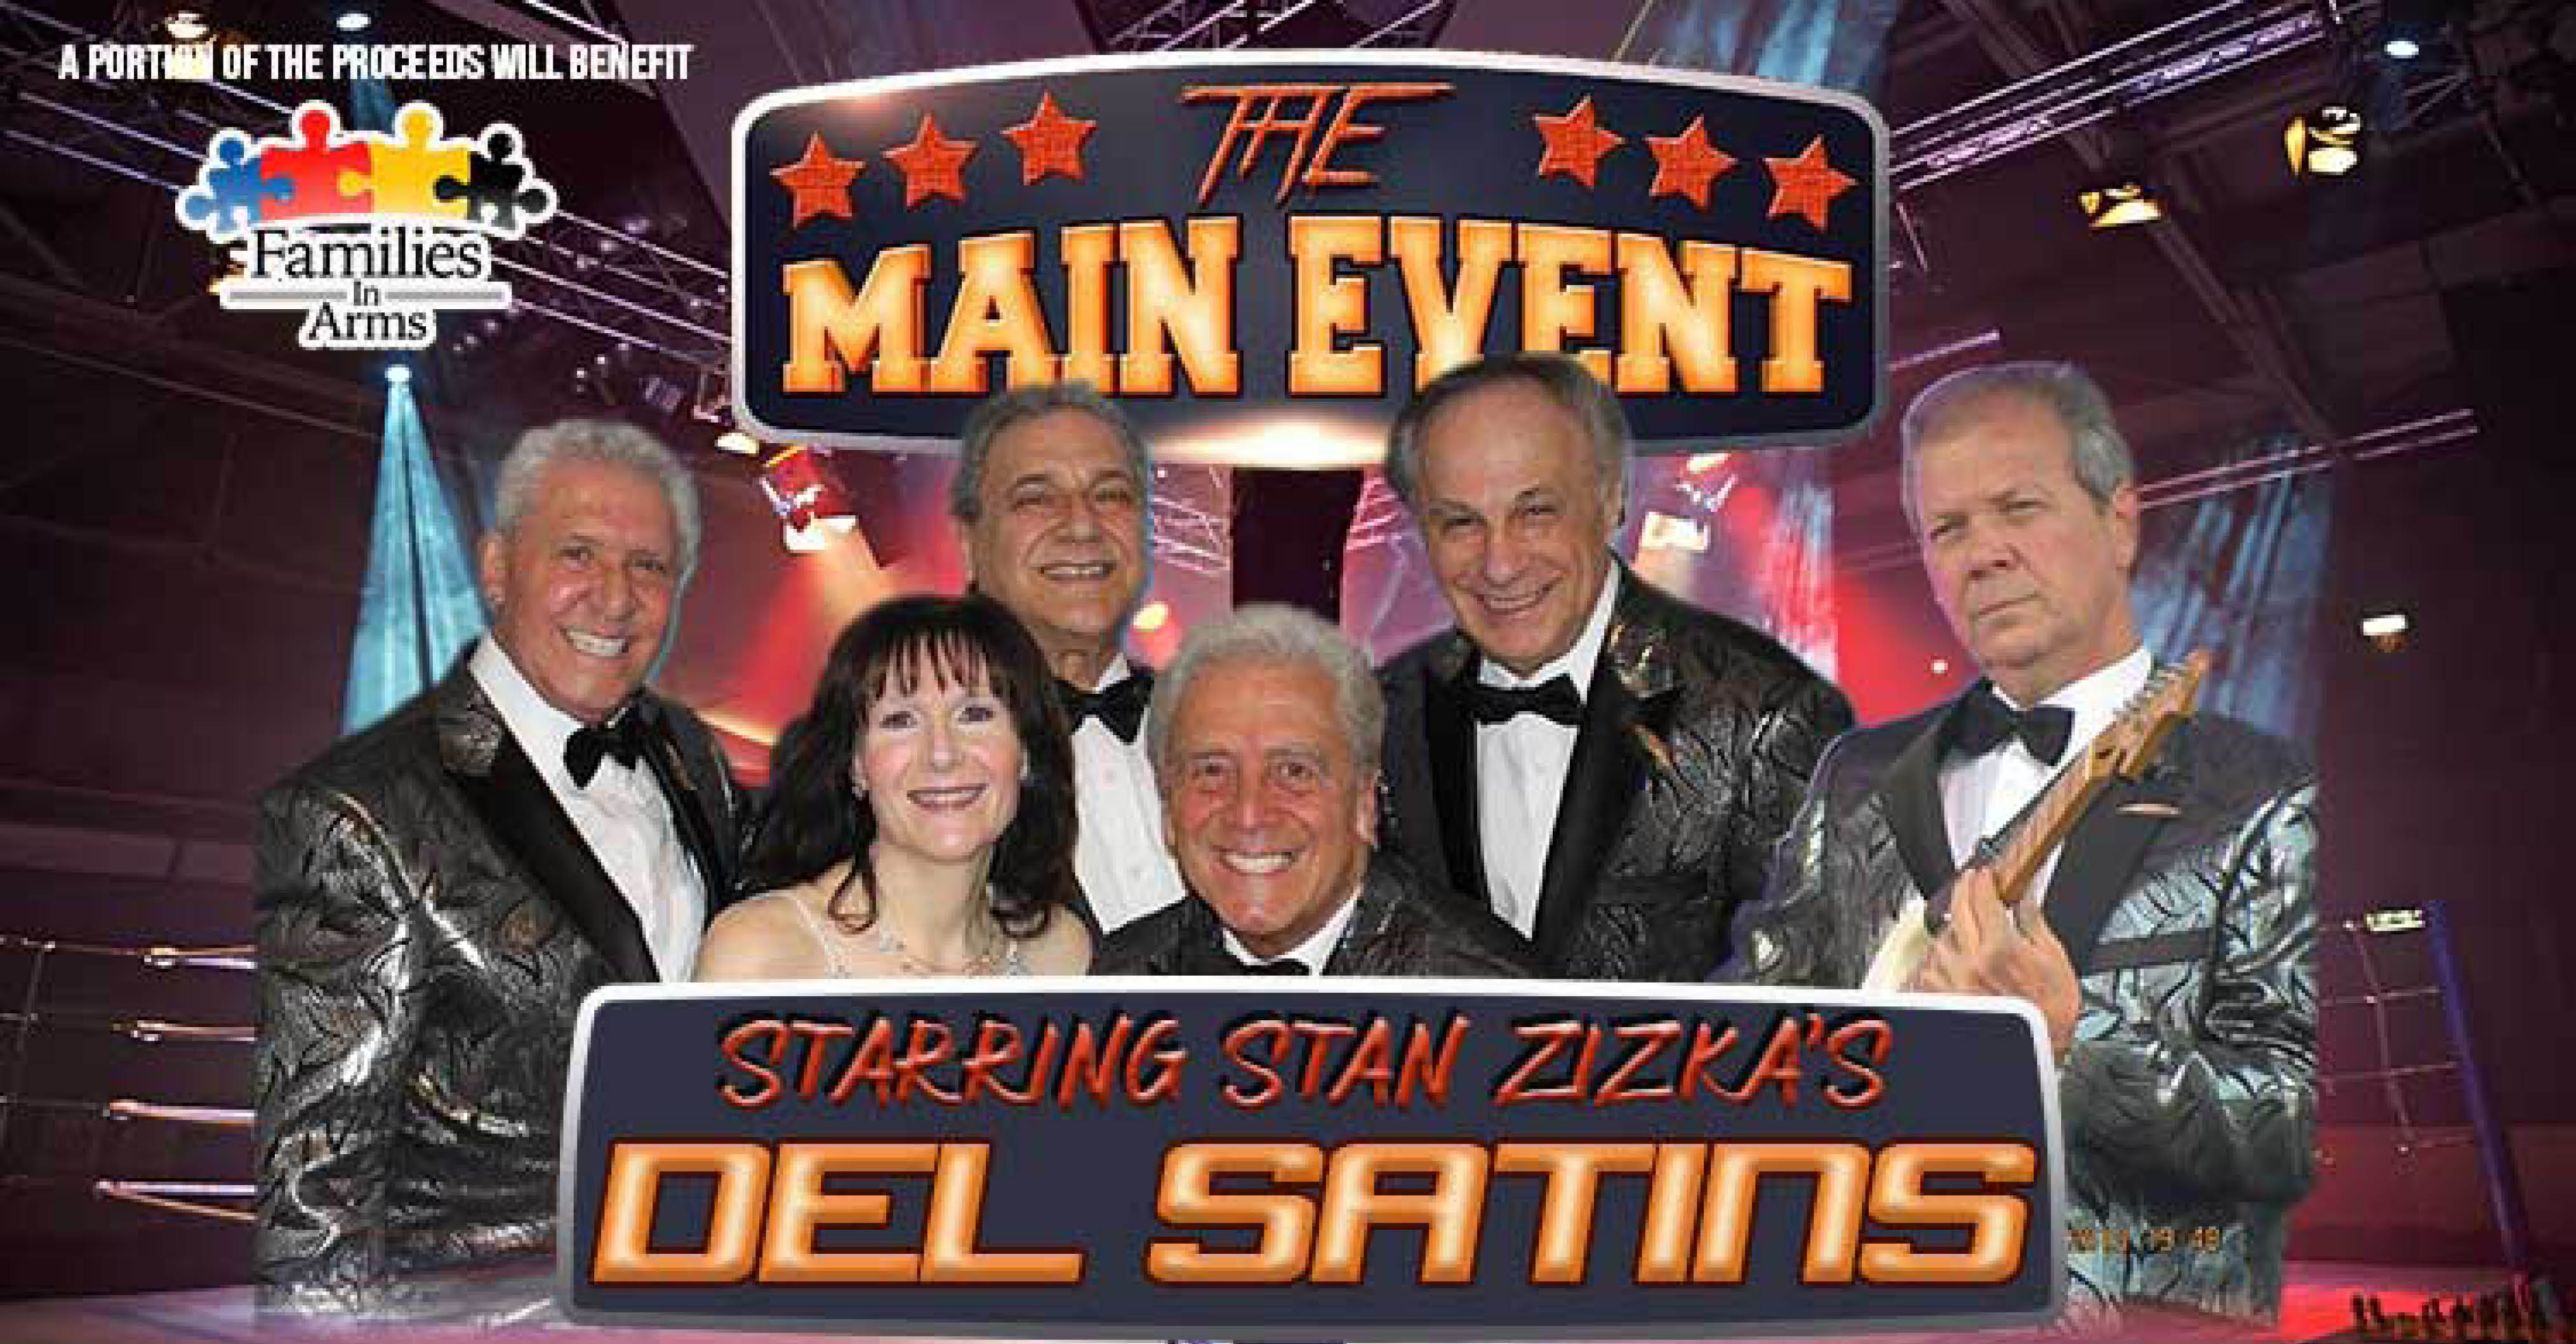 THE MAIN EVENT STARRING STAN ZIZKAS DEL SATINS